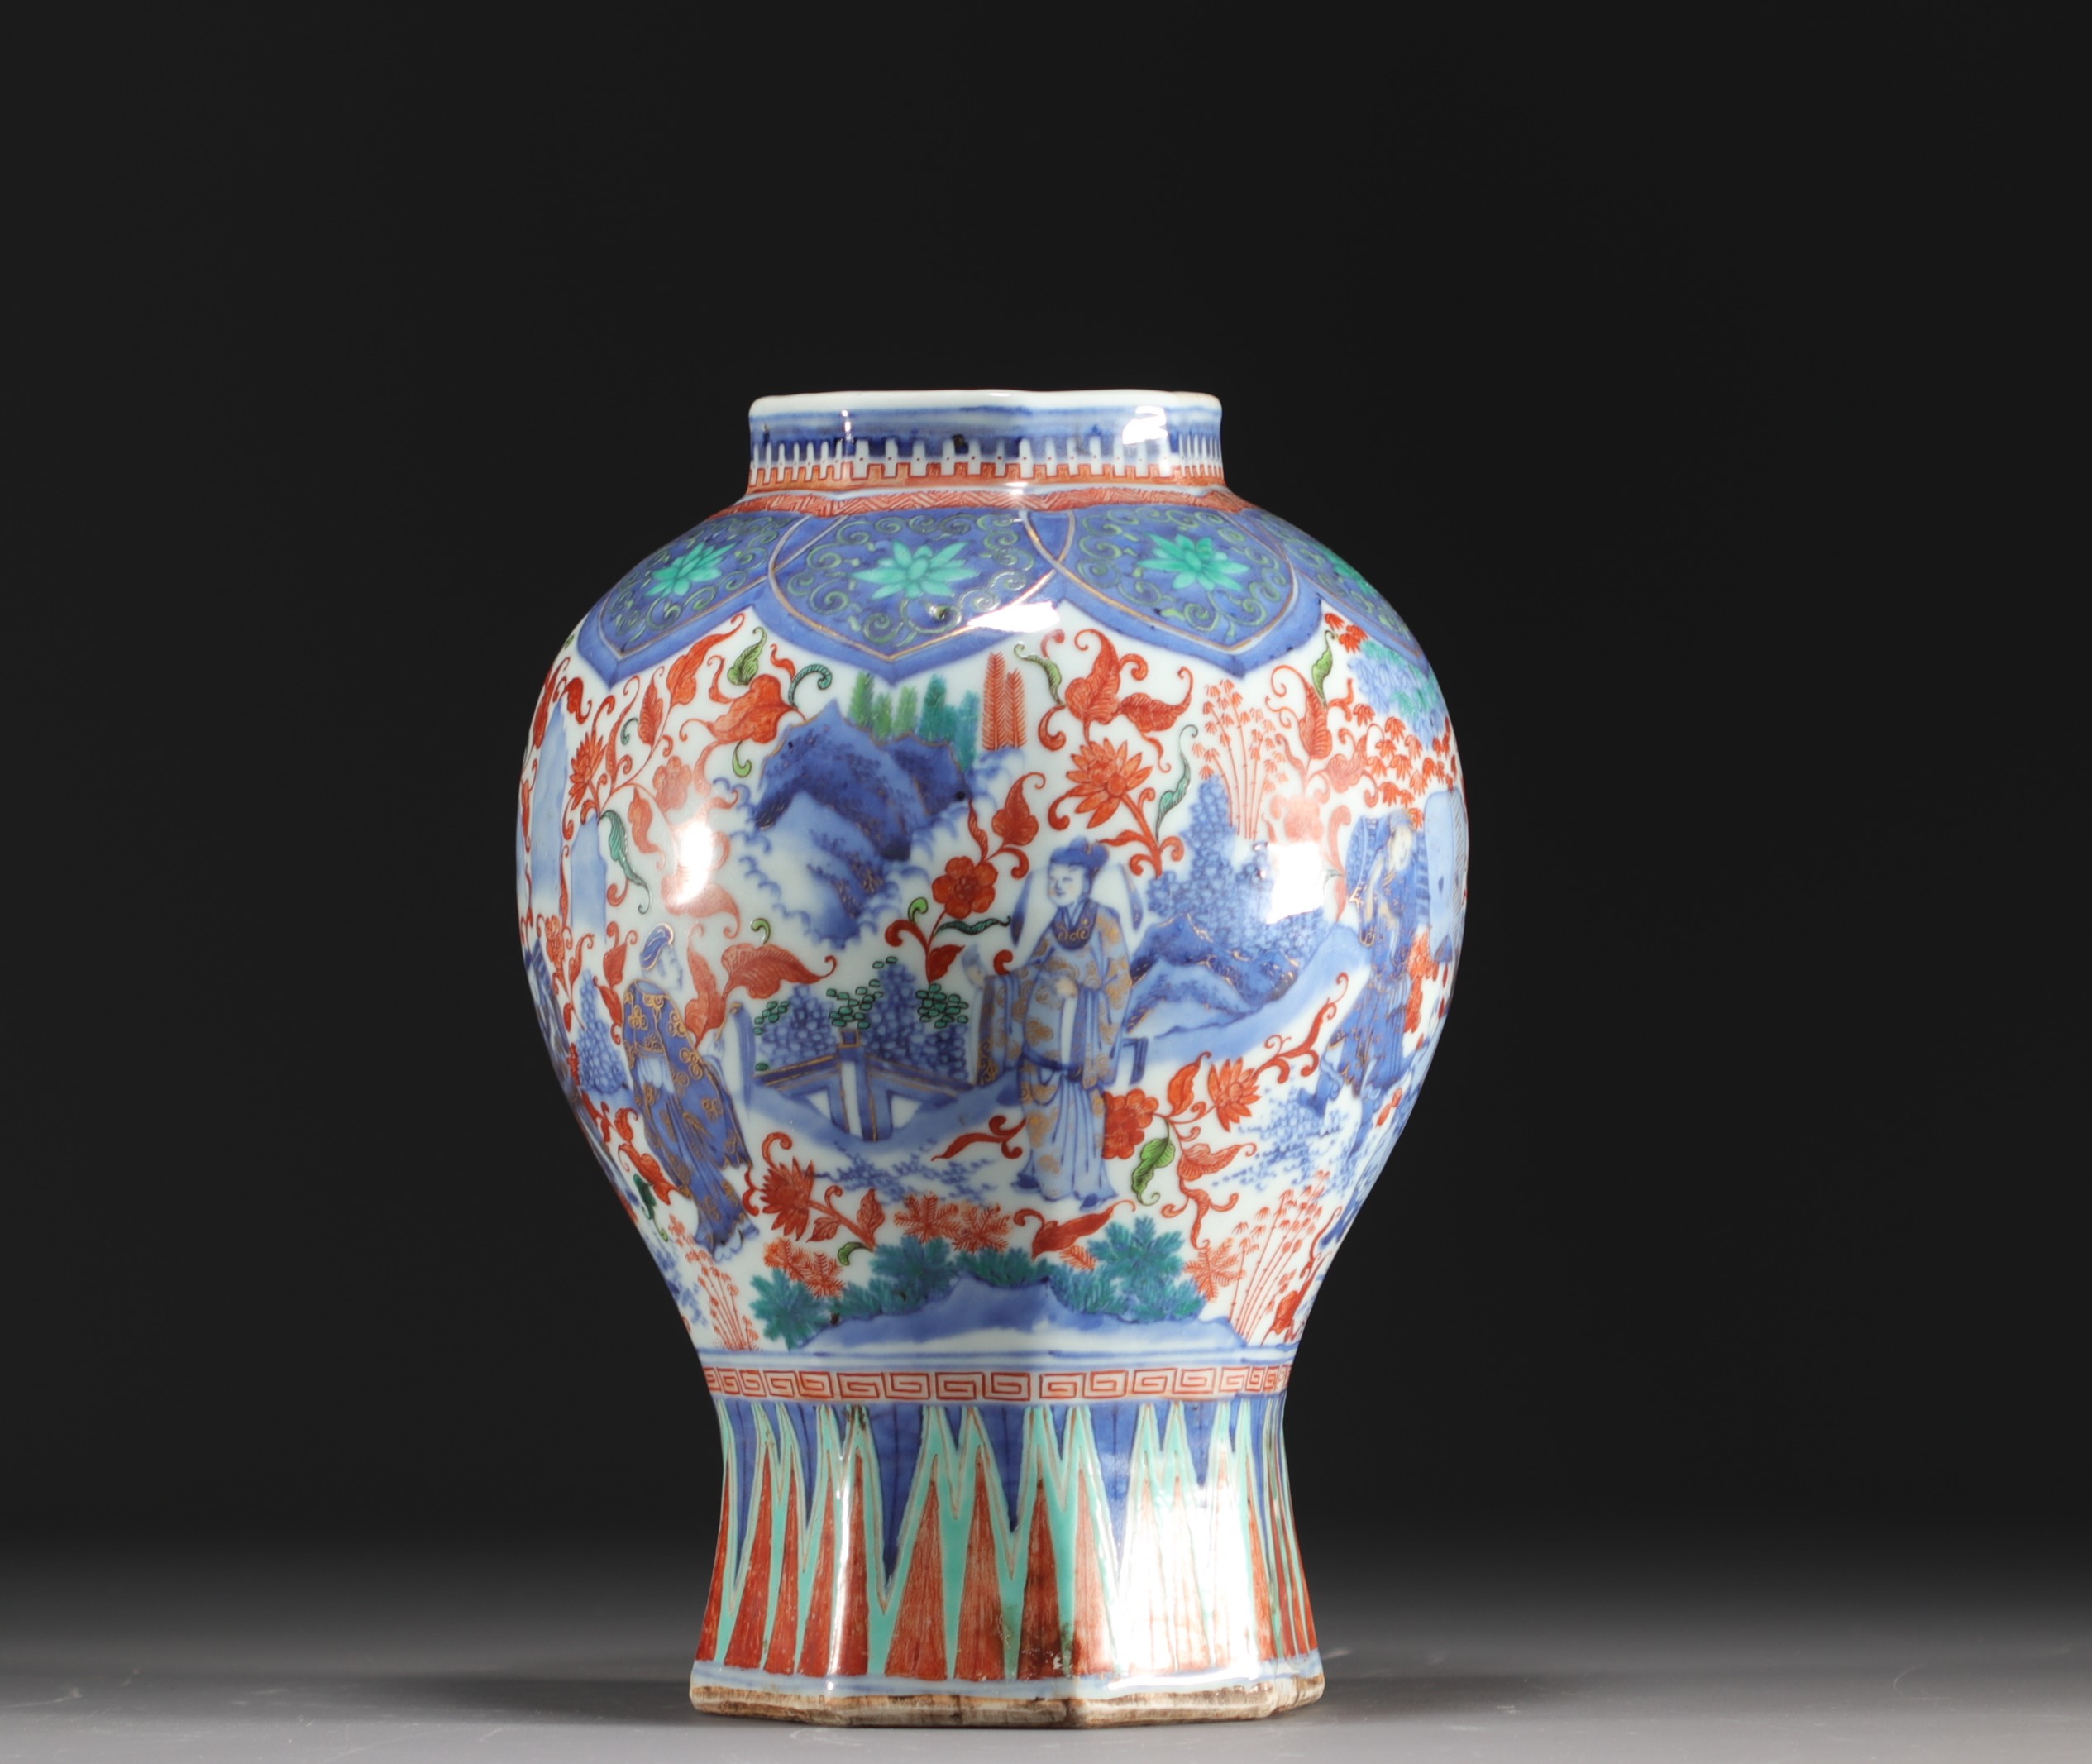 China - Polychrome porcelain vase decorated with figures and landscape, transition period. - Image 4 of 7